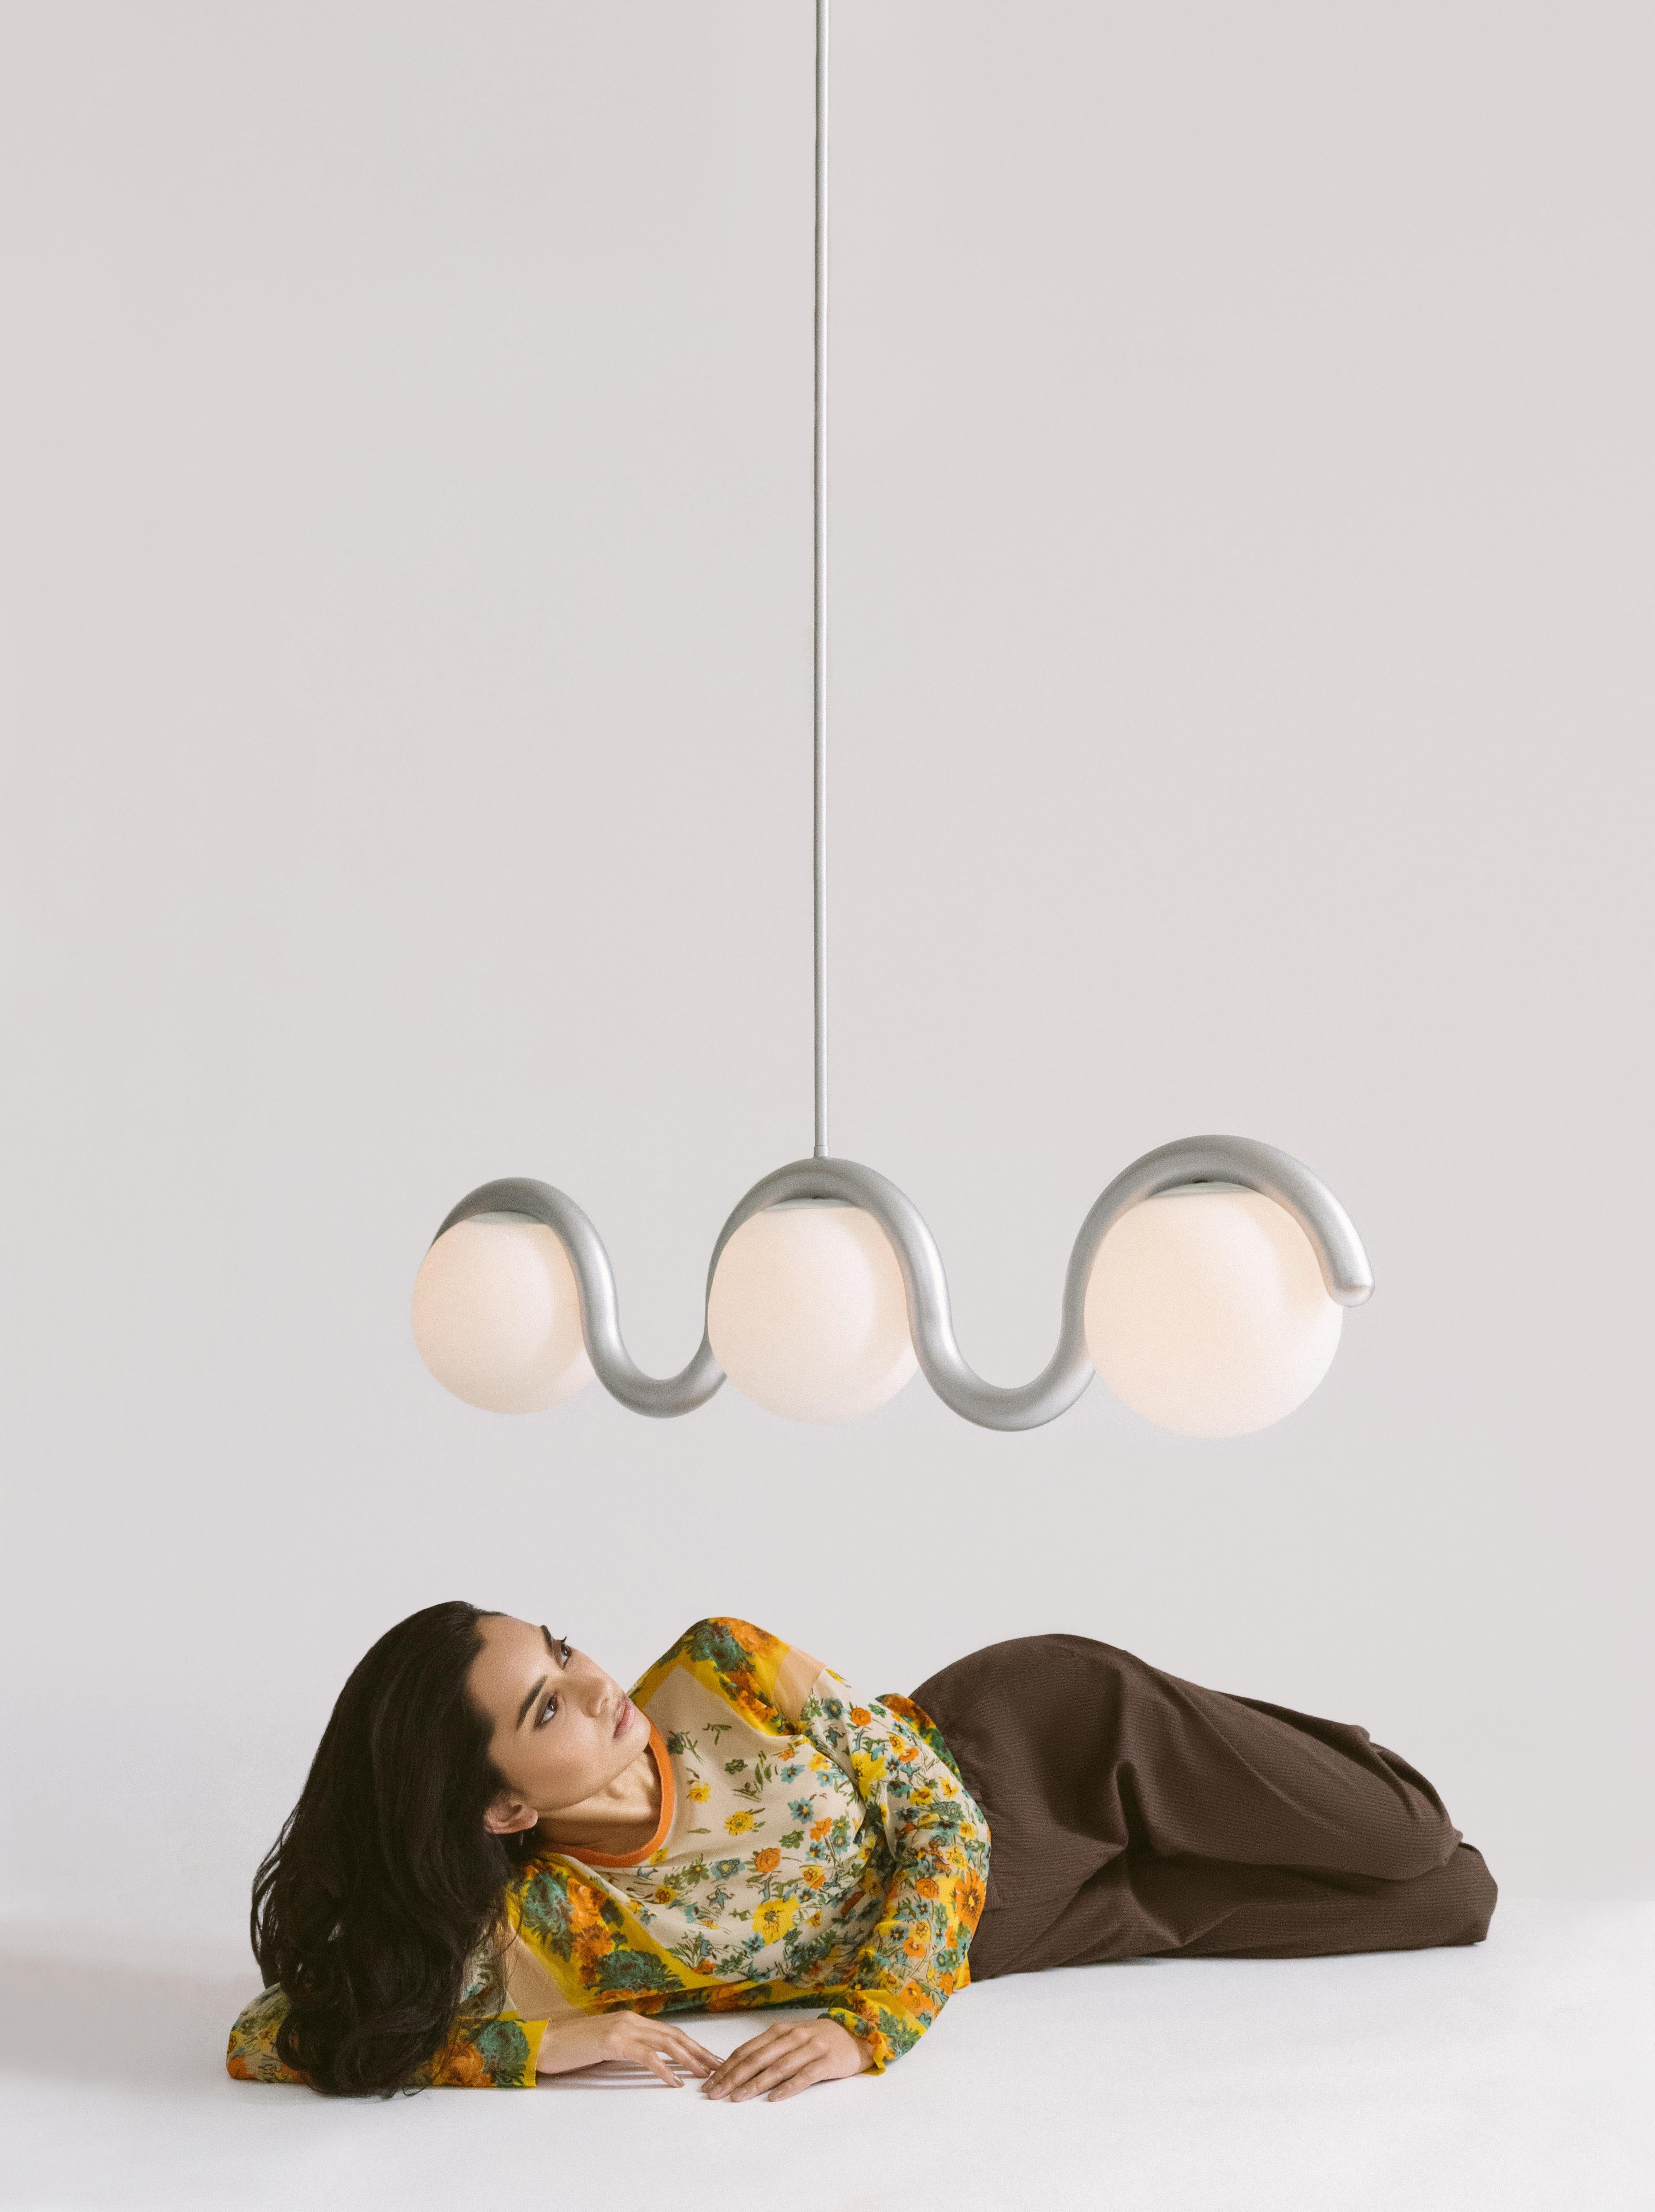 The scalloped design of the Lenox series was inspired by walks through Greenwich Village. A sophisticated and modern take on Art Nouveau, the metal tube bends around the shape of the globe light, creating a flow of movement and synchrony between the